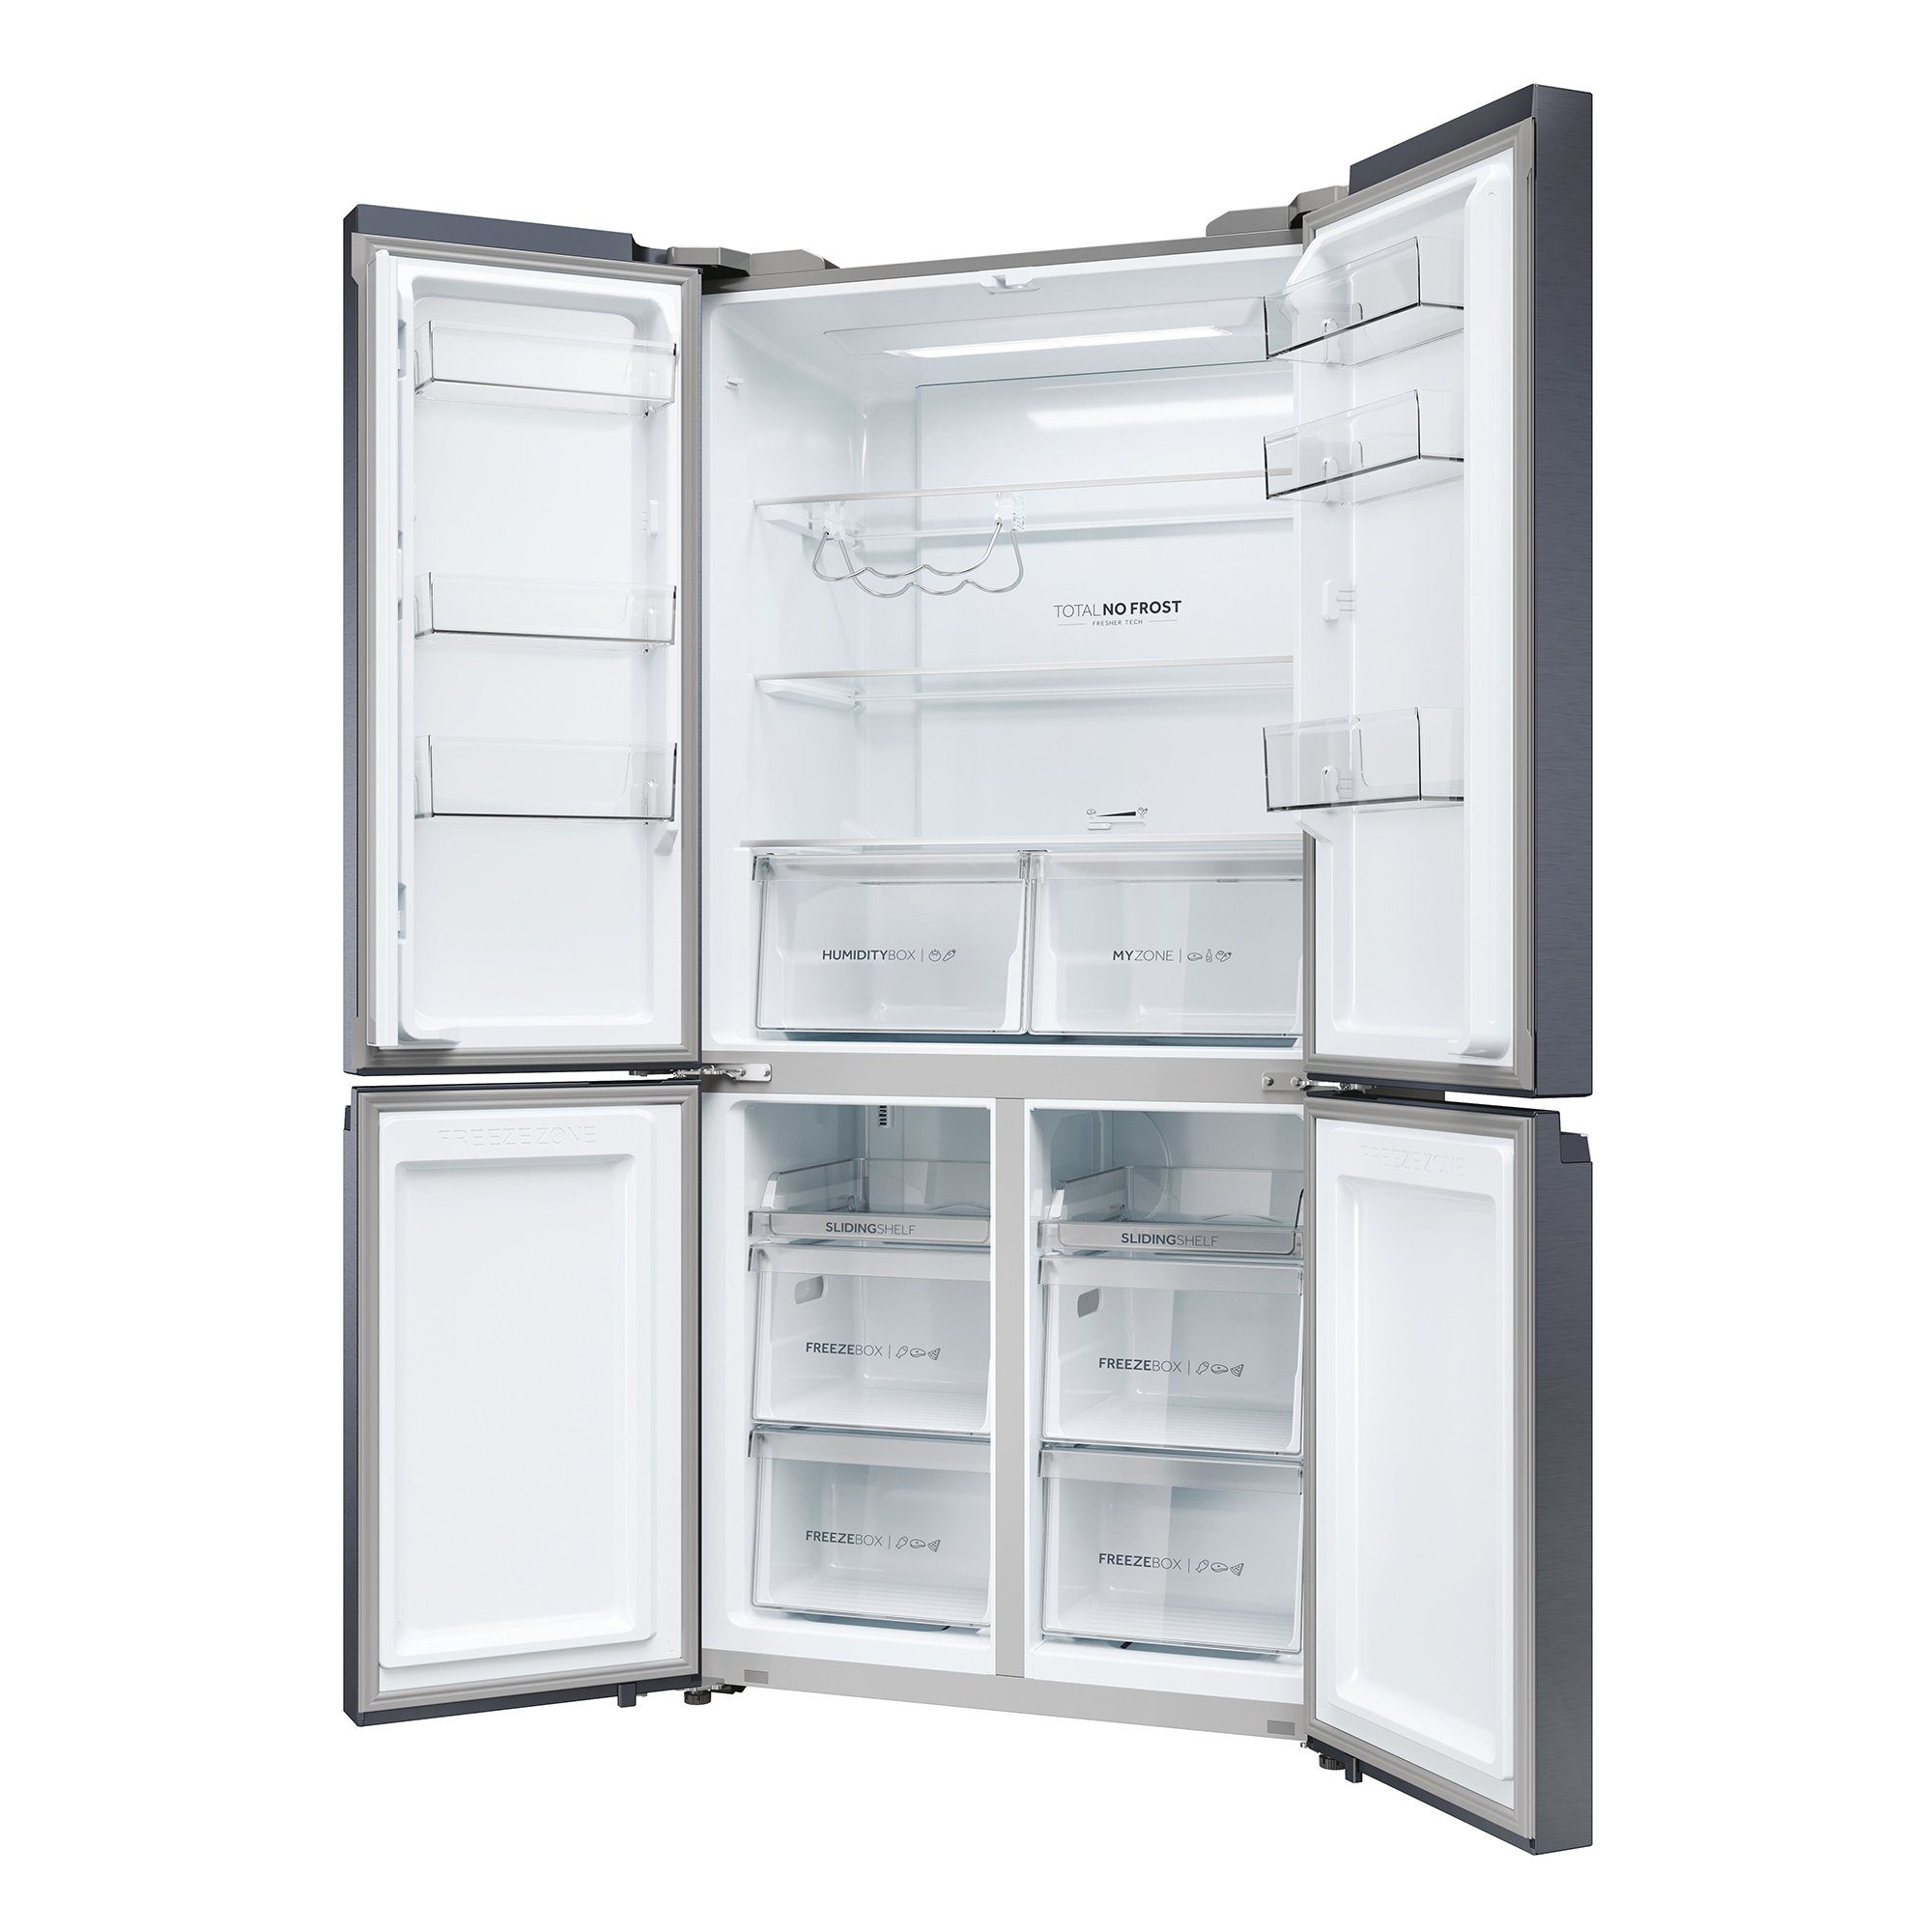 CUBE MyZone, hoch, cm cm Frost, Total 190 Flow Holiday Modus, HCR5919ENMB, Multi Door SERIES No 90 French Air Haier 5 breit, 90.5